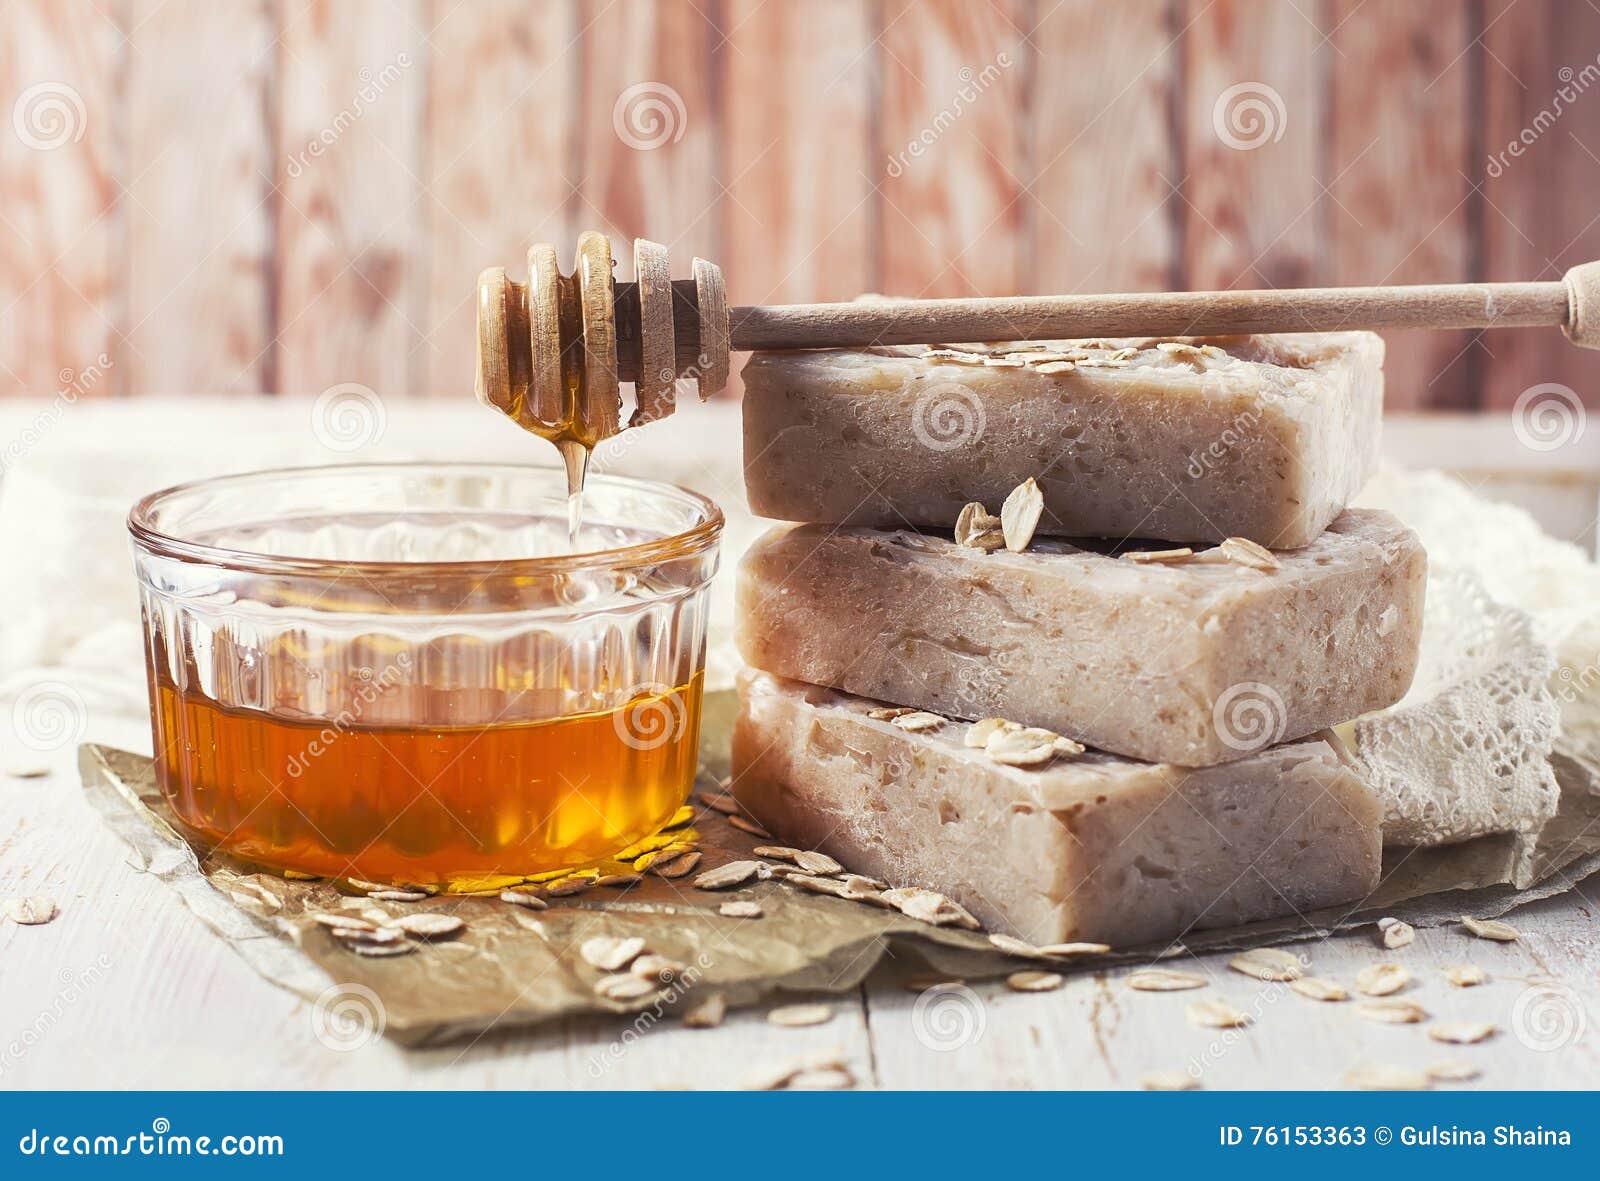 handmade soap with honey and oatmeal.